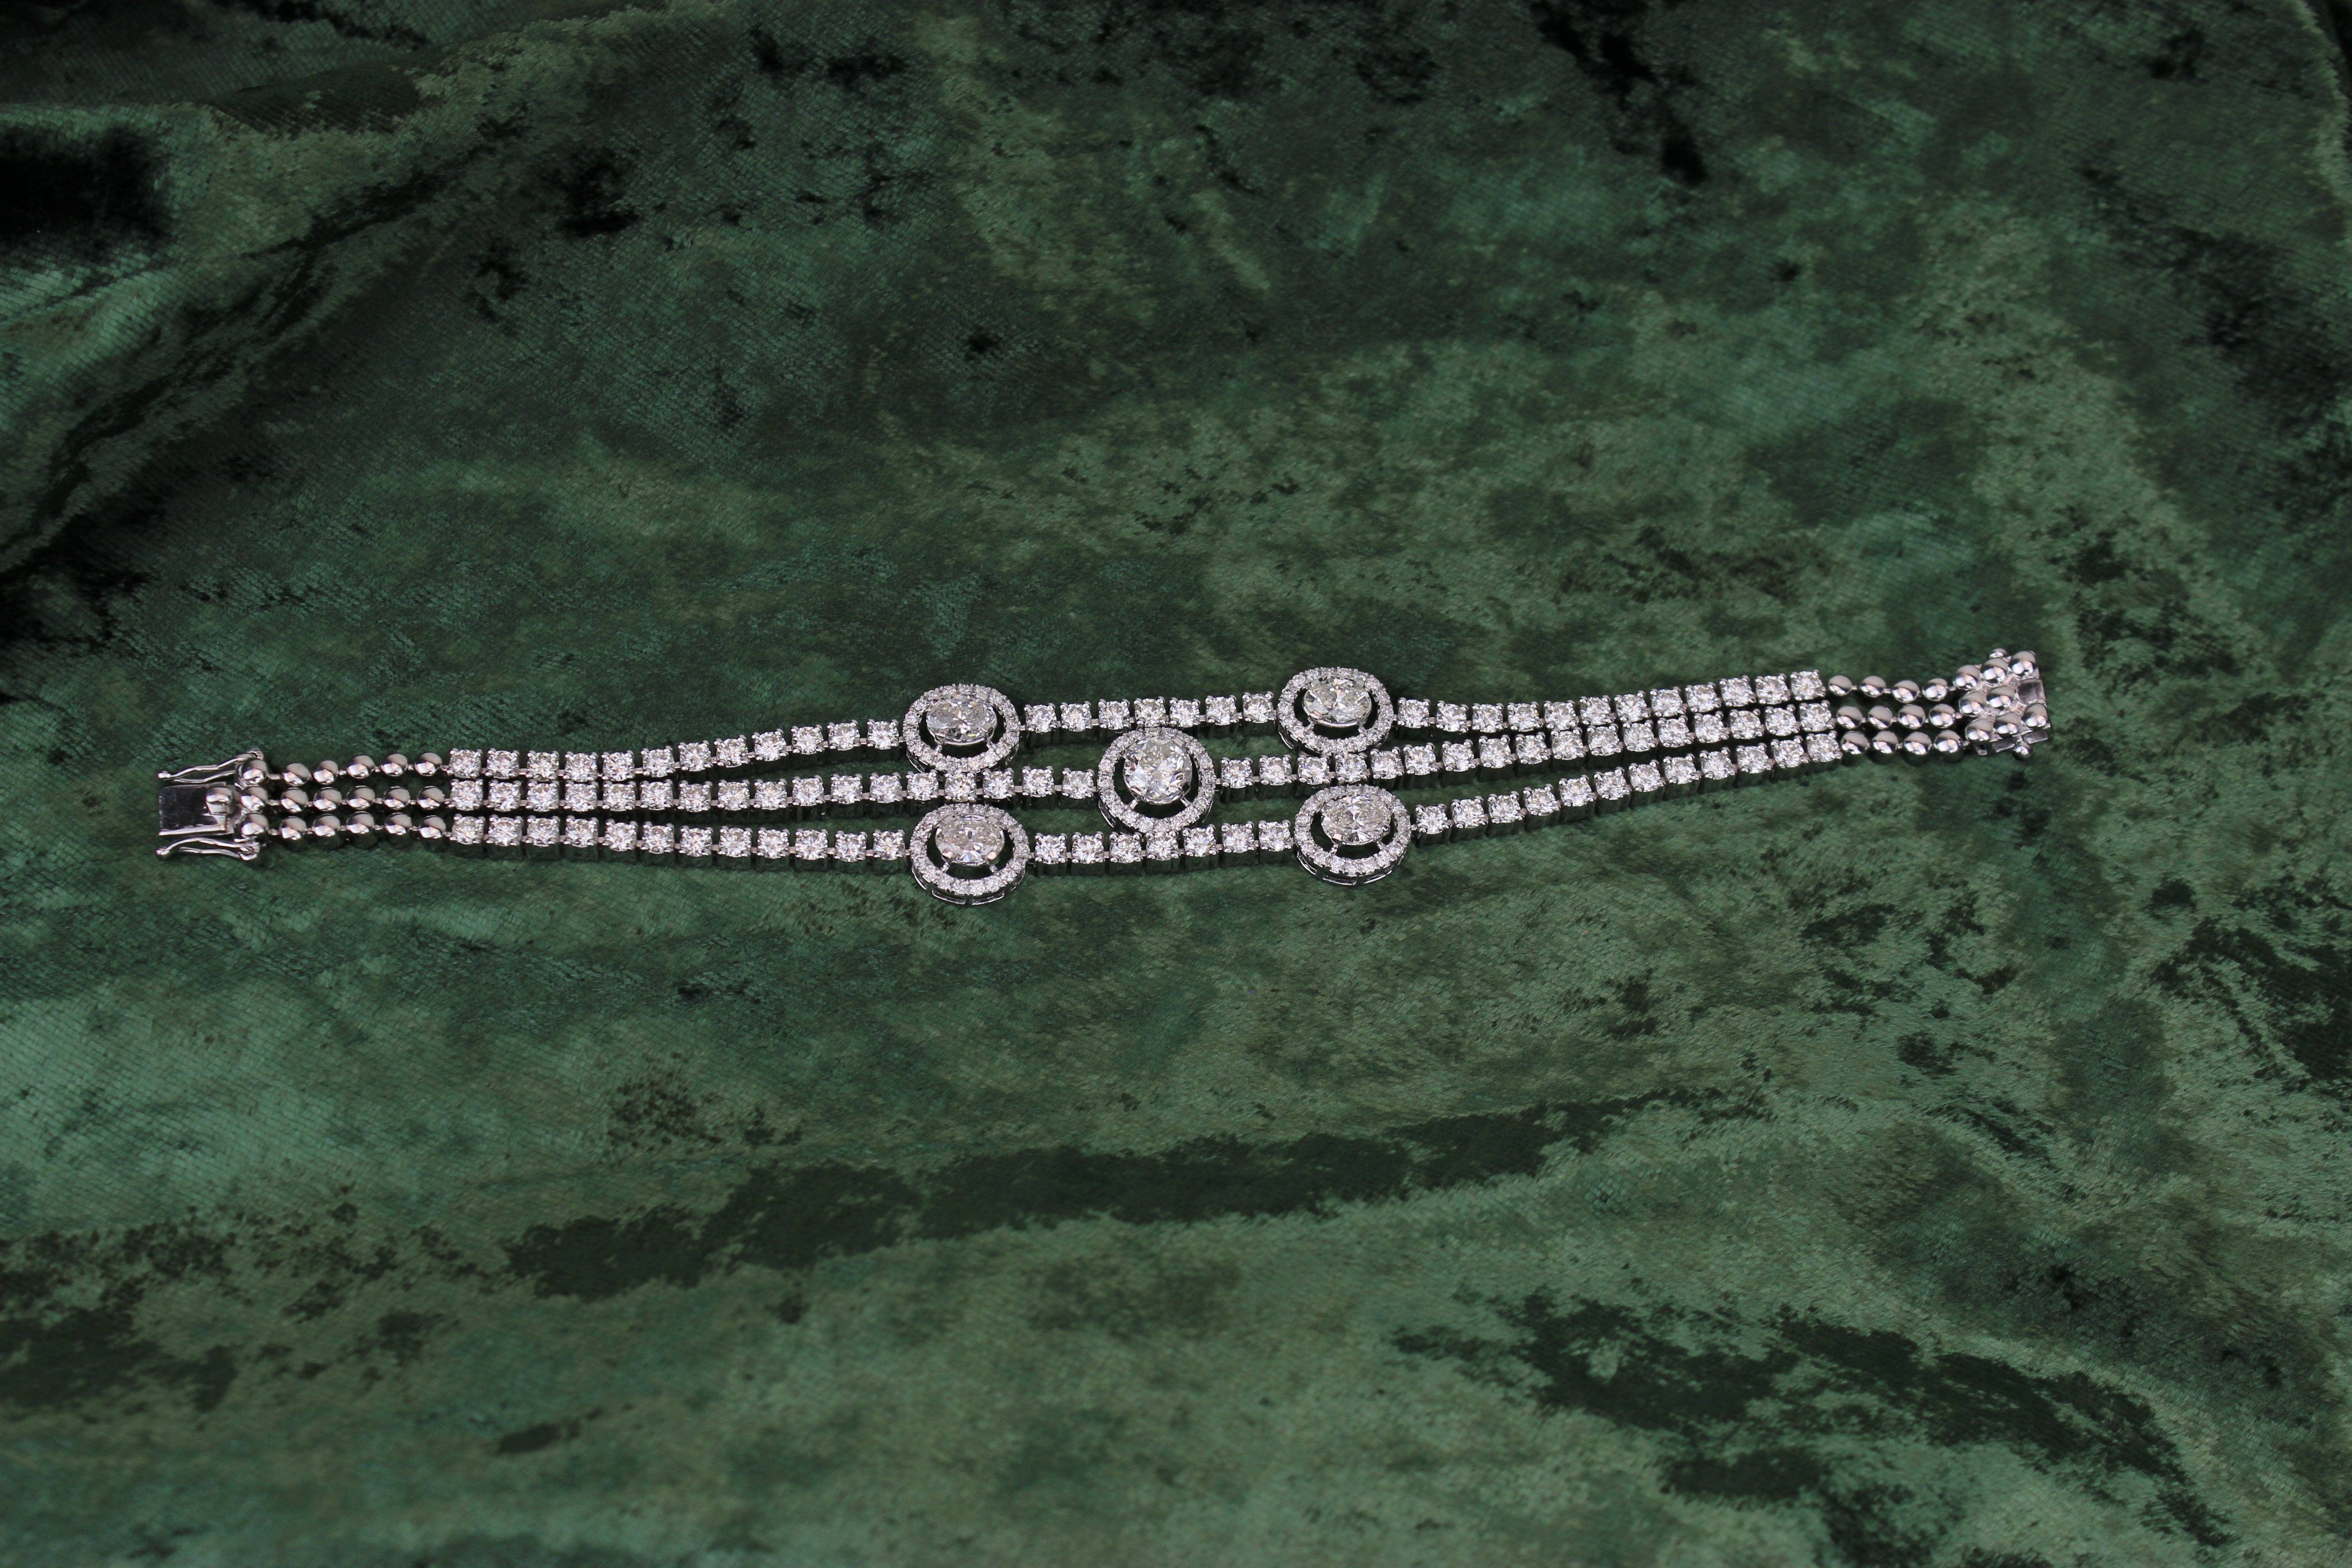 Features oval & round cut diamonds. Made with the highest quality natural diamonds on a 100% guaranteed 18k solid gold. 

THE STONES-
This bracelet consists of  oval & round solitaire shaped natural diamonds (average size 65 pointers) weighing 3.24